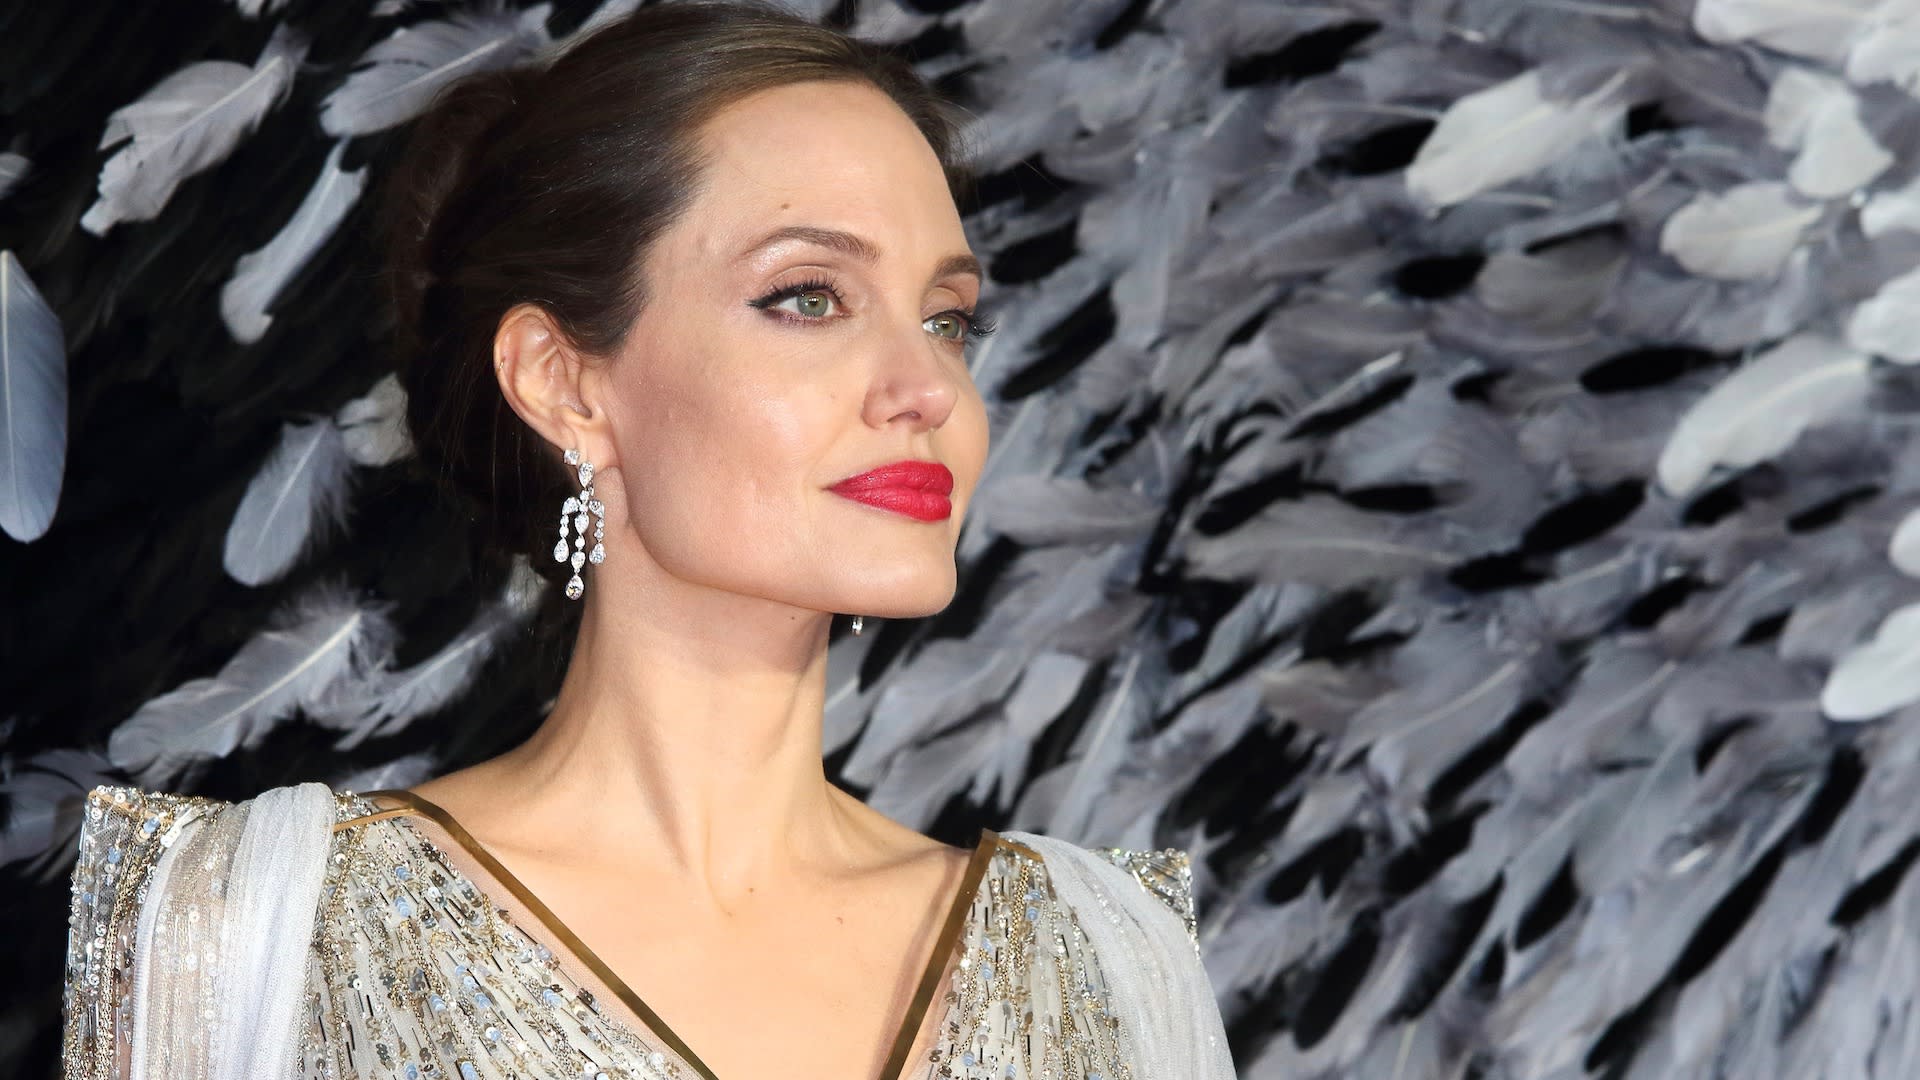 Angelina Jolie claims to have ‘proof’ of Brad Pitt’s alleged domestic violence